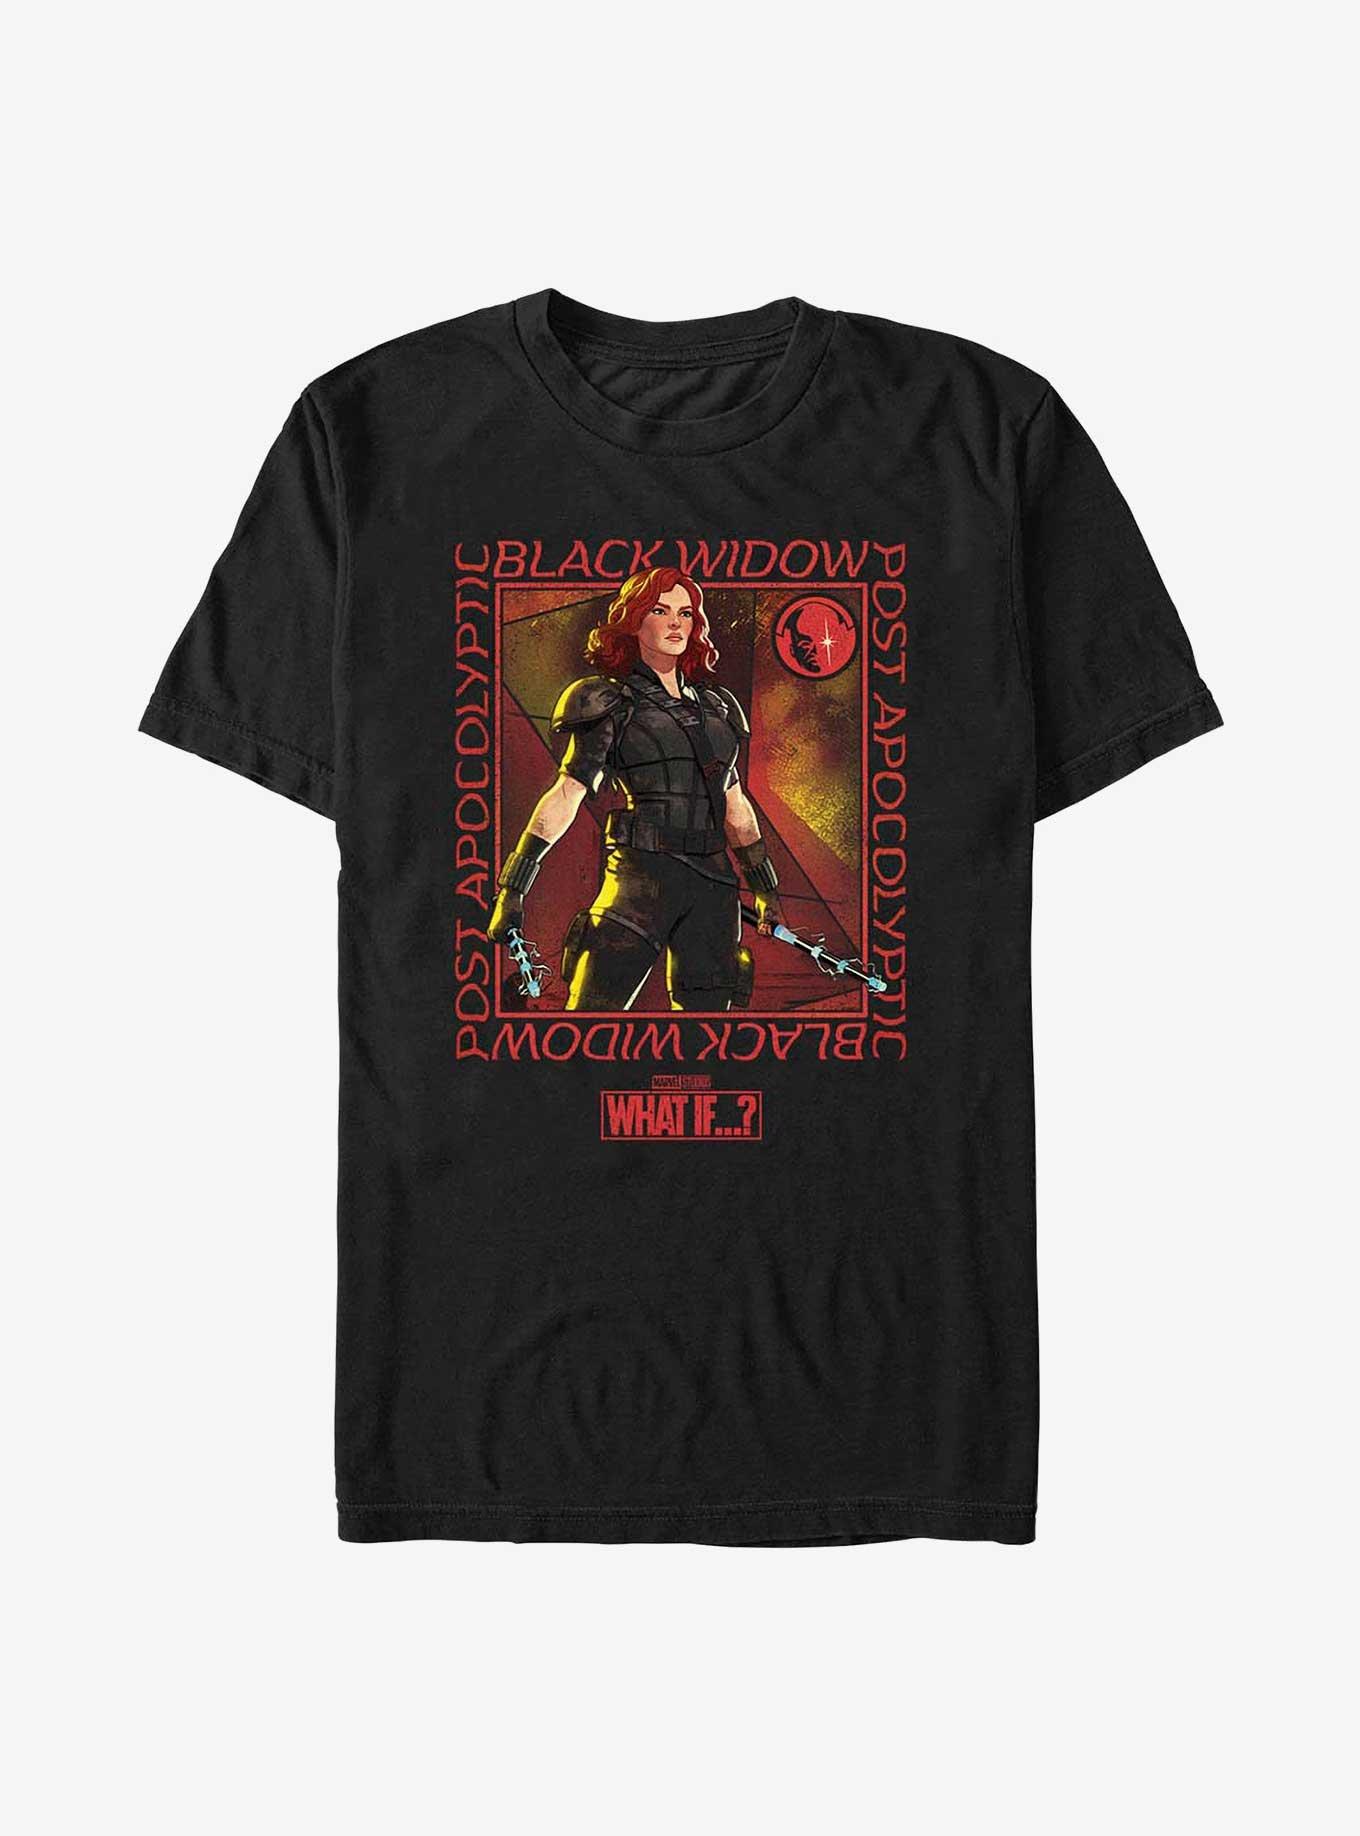 Marvel What If?? Post Apocolyptic Black Widow T-Shirt, BLACK, hi-res